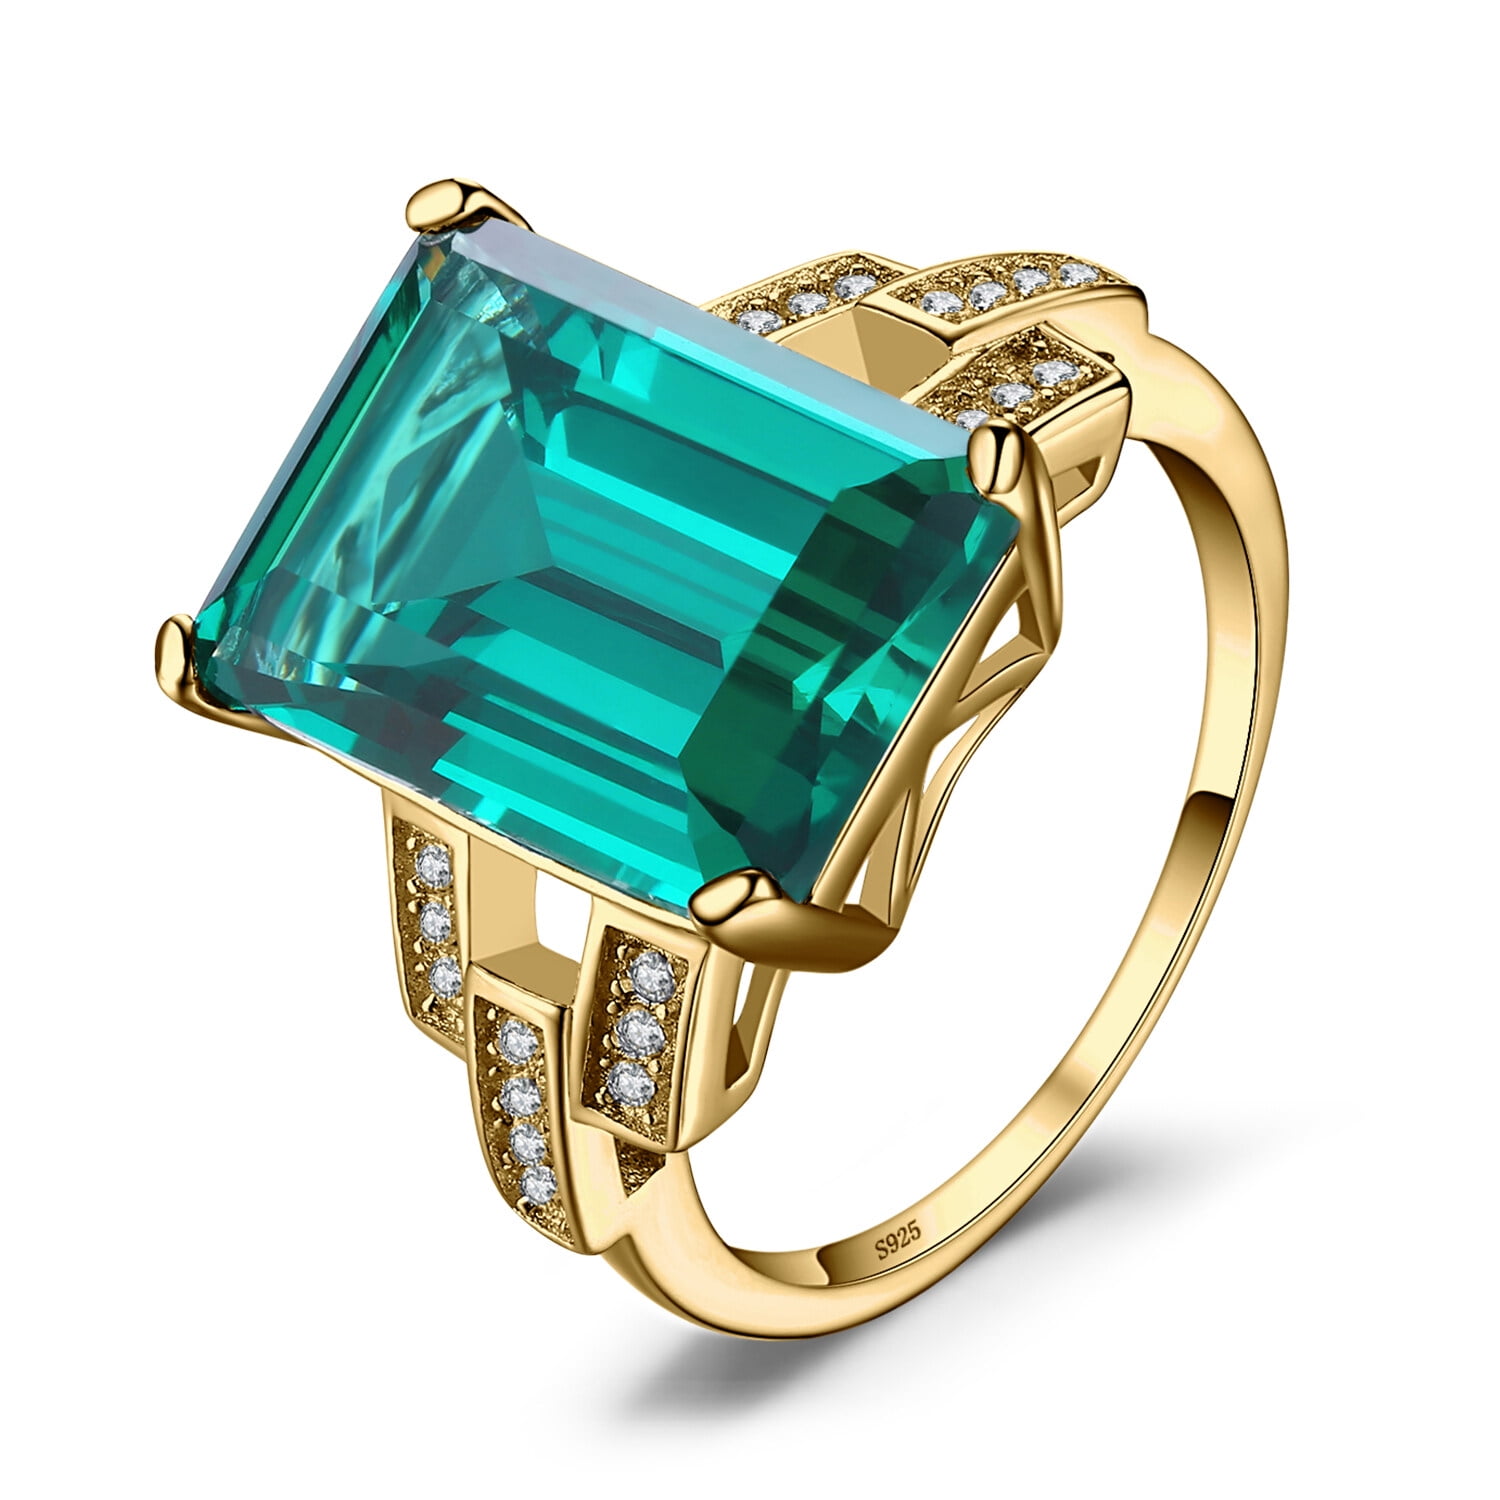 Thalini Floral Emerald Cocktail Ring by VBJ